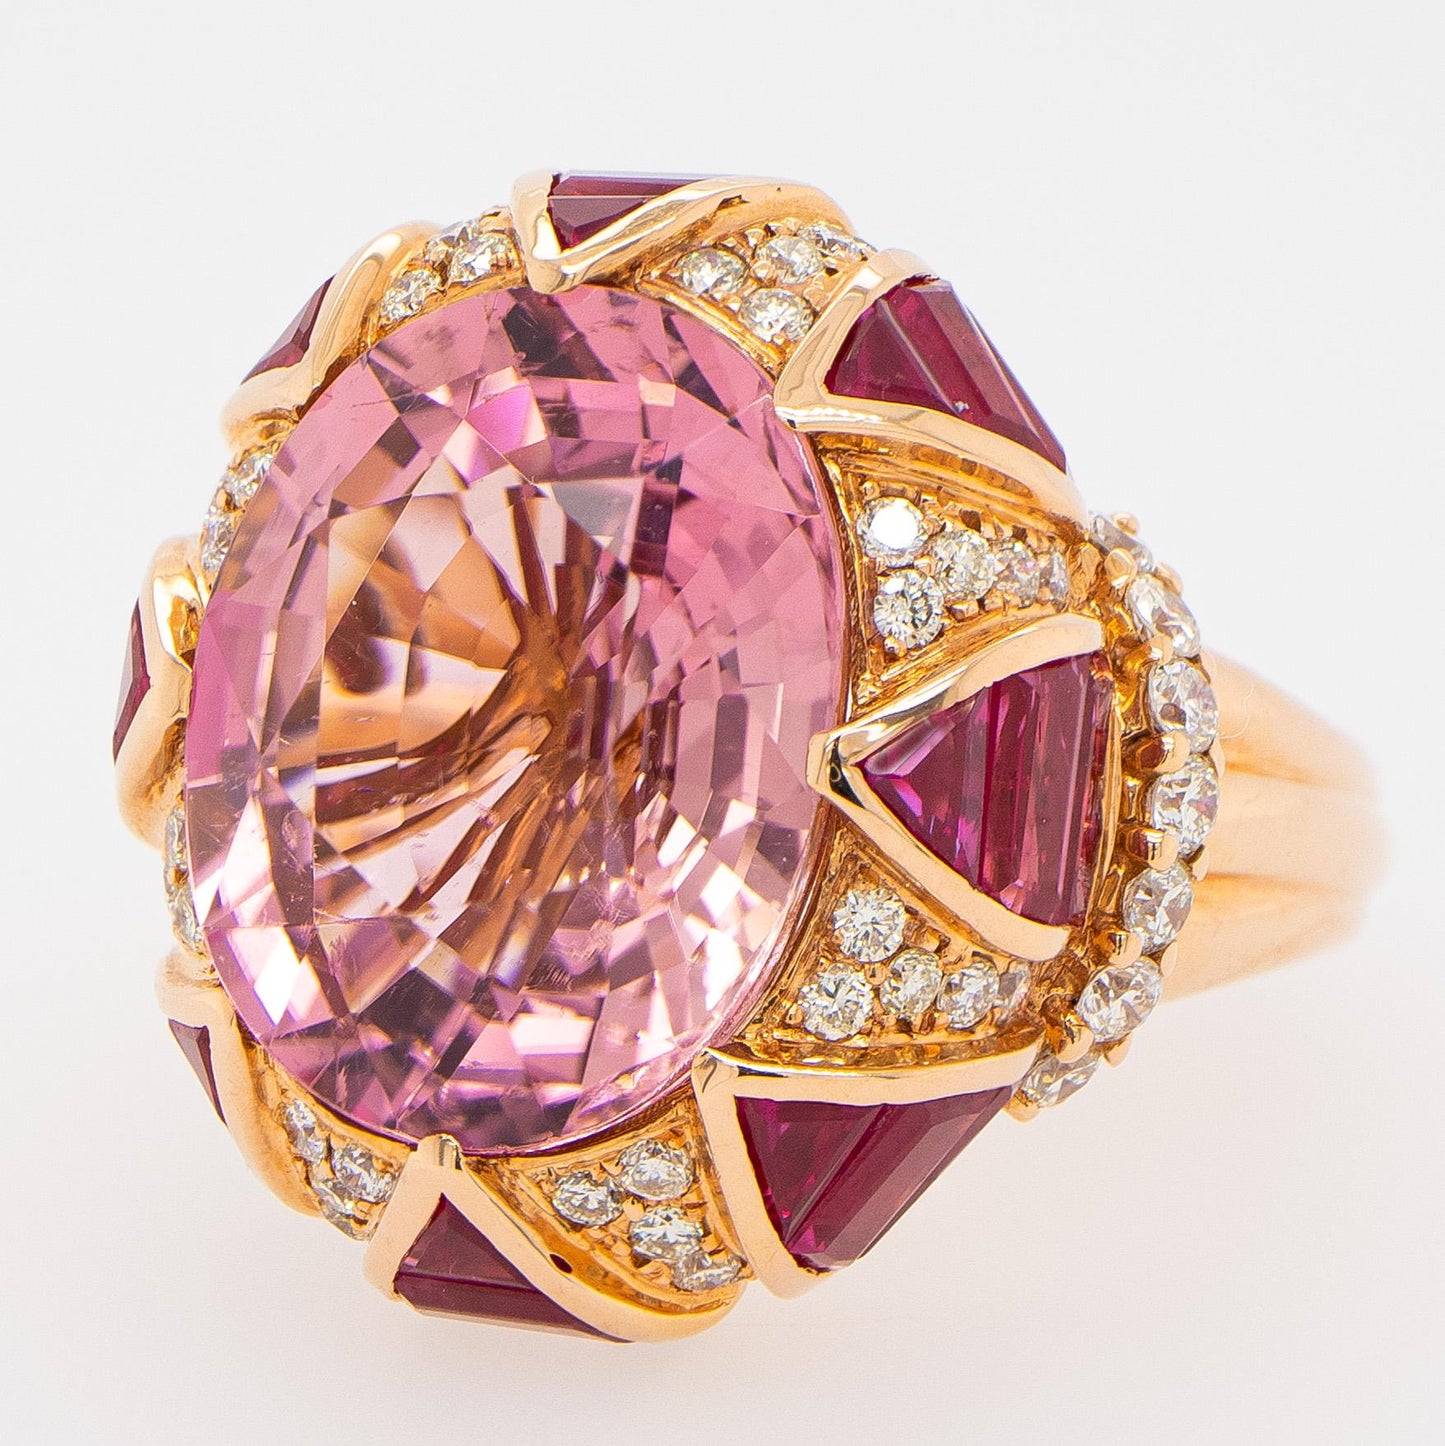 Cocktail 10 Carat Topaz Ring Set with Rubies and Diamonds 18K Yellow Gold